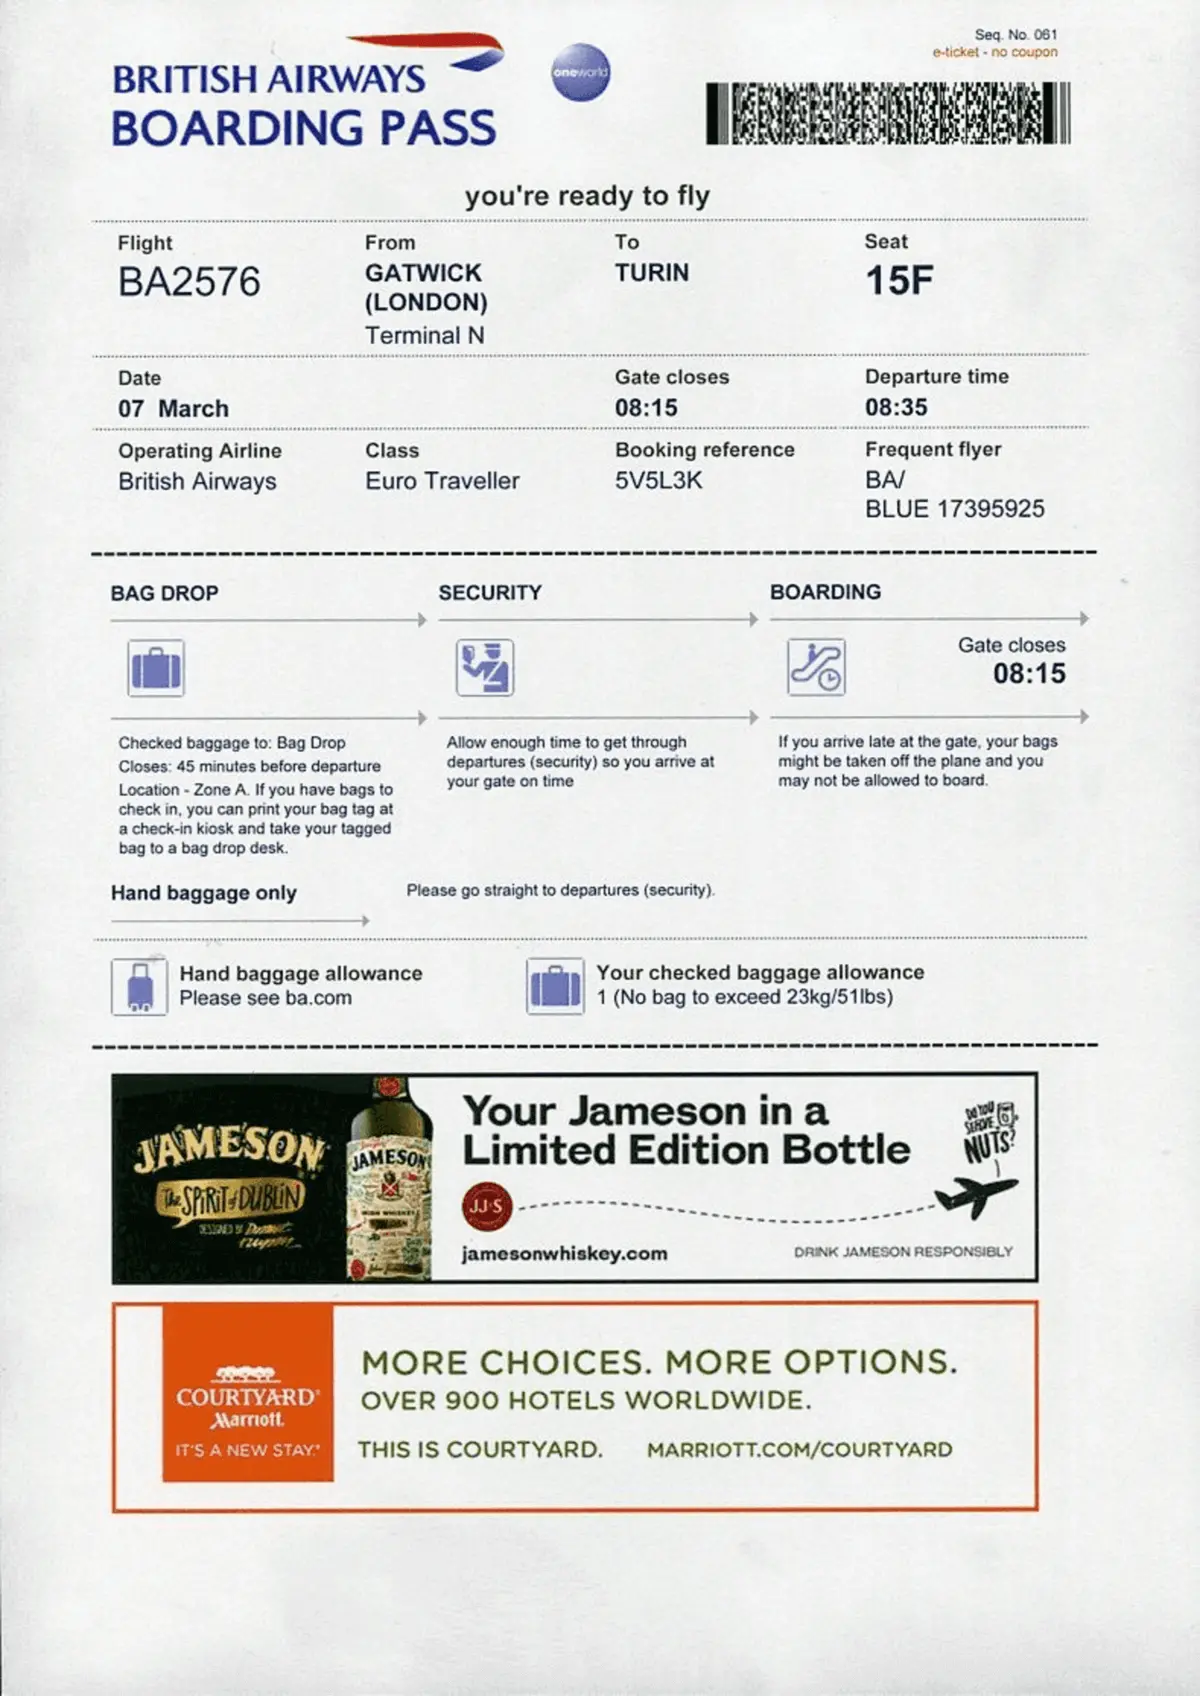 Tampa Airport Tap Advertising Boarding Passes A1